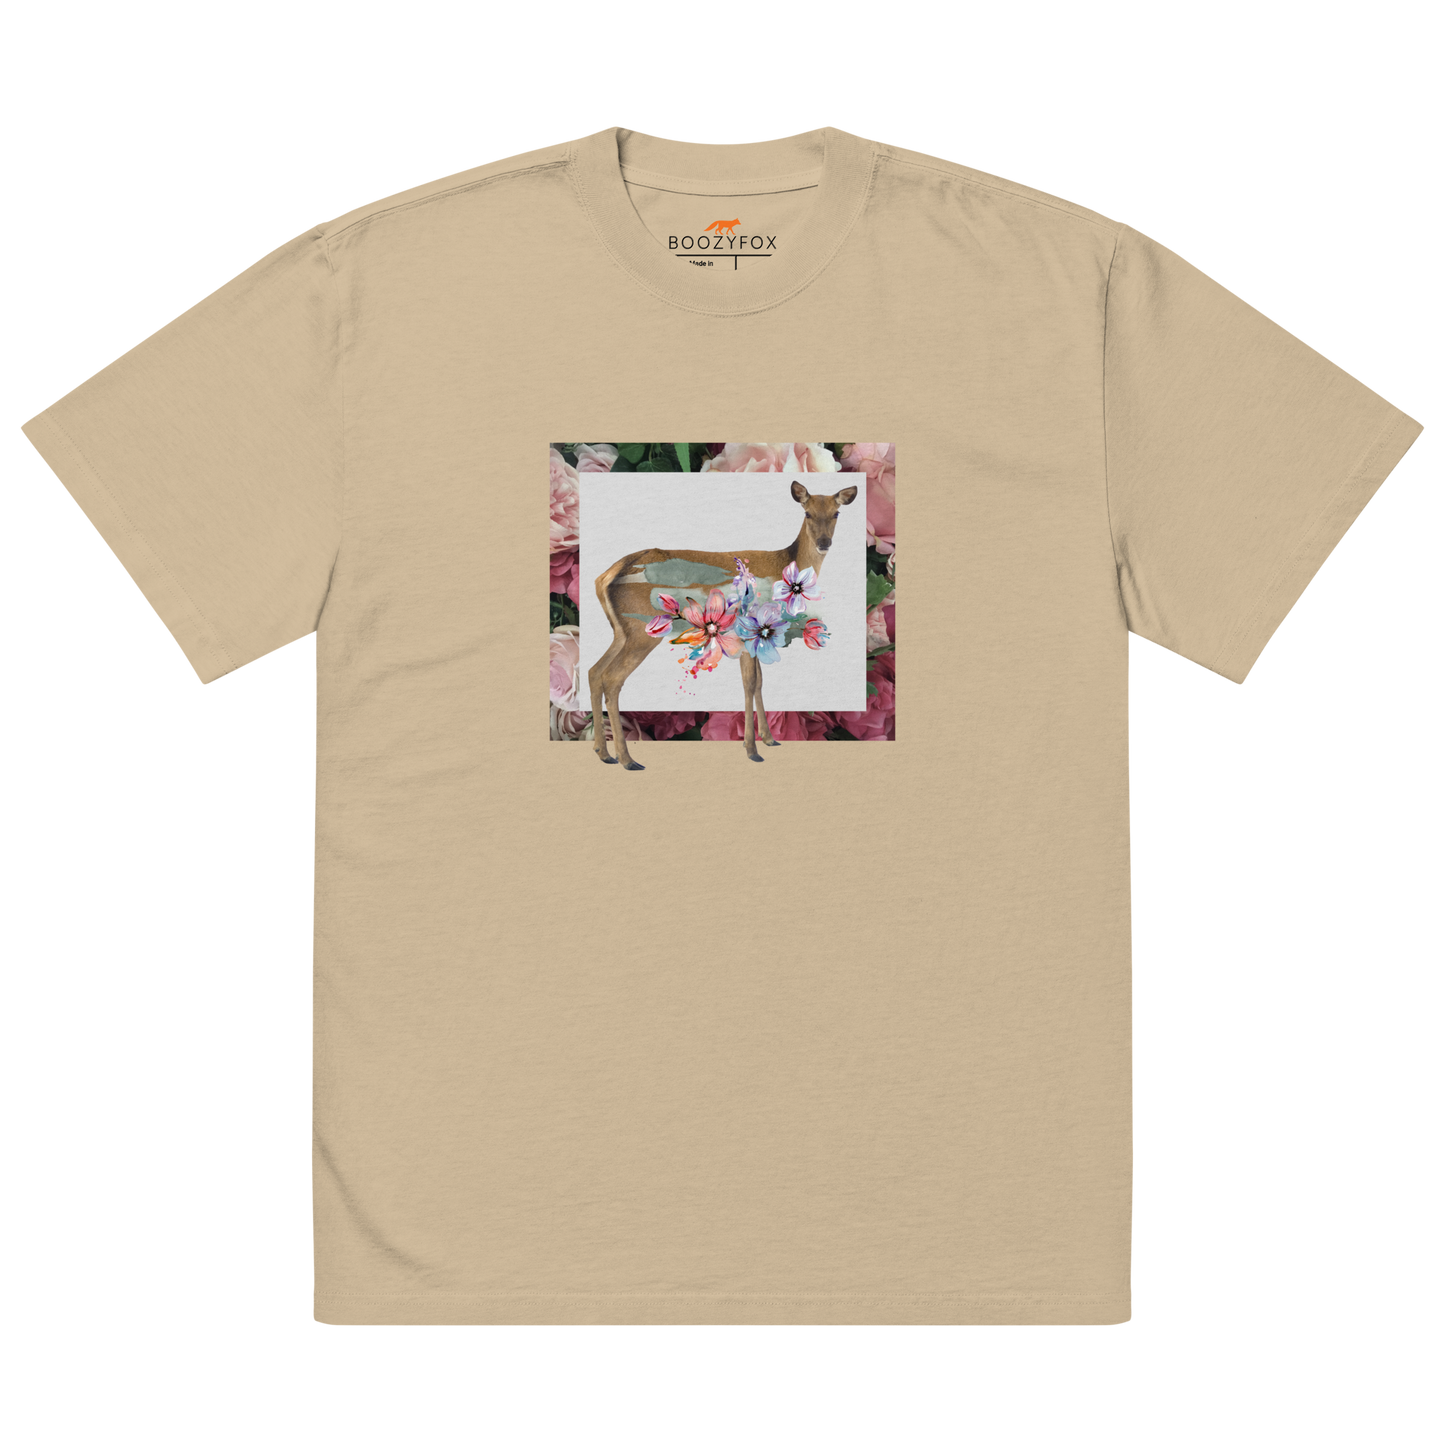 Faded Khaki Deer Oversized T-Shirt featuring a captivating Floral Deer graphic on the chest - Cute Graphic Deer Oversized Tees - Boozy Fox